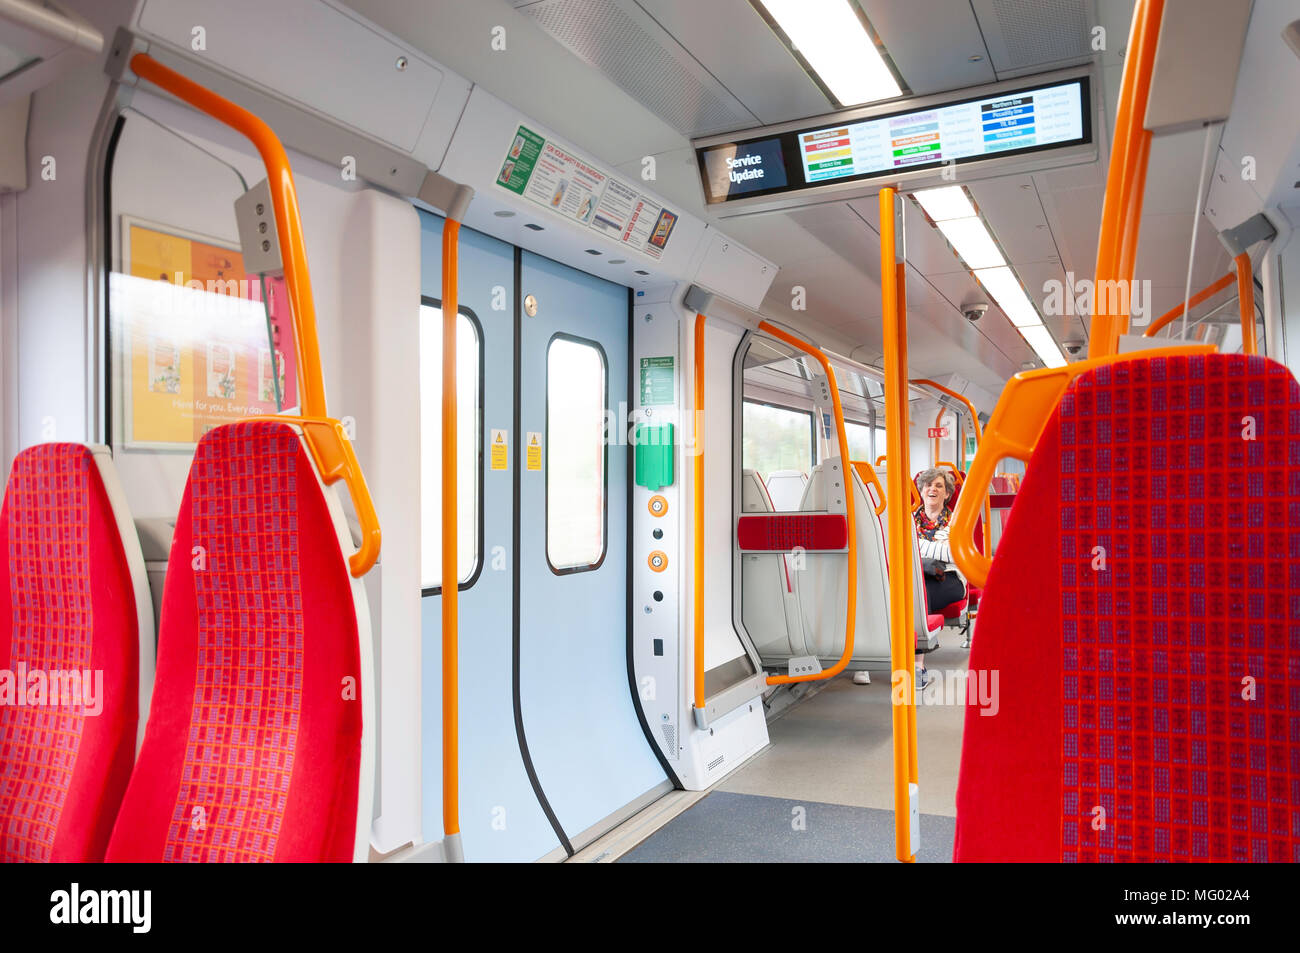 Interior of South Western Railway train carriage, Greater London,  England, United Kingdom Stock Photo